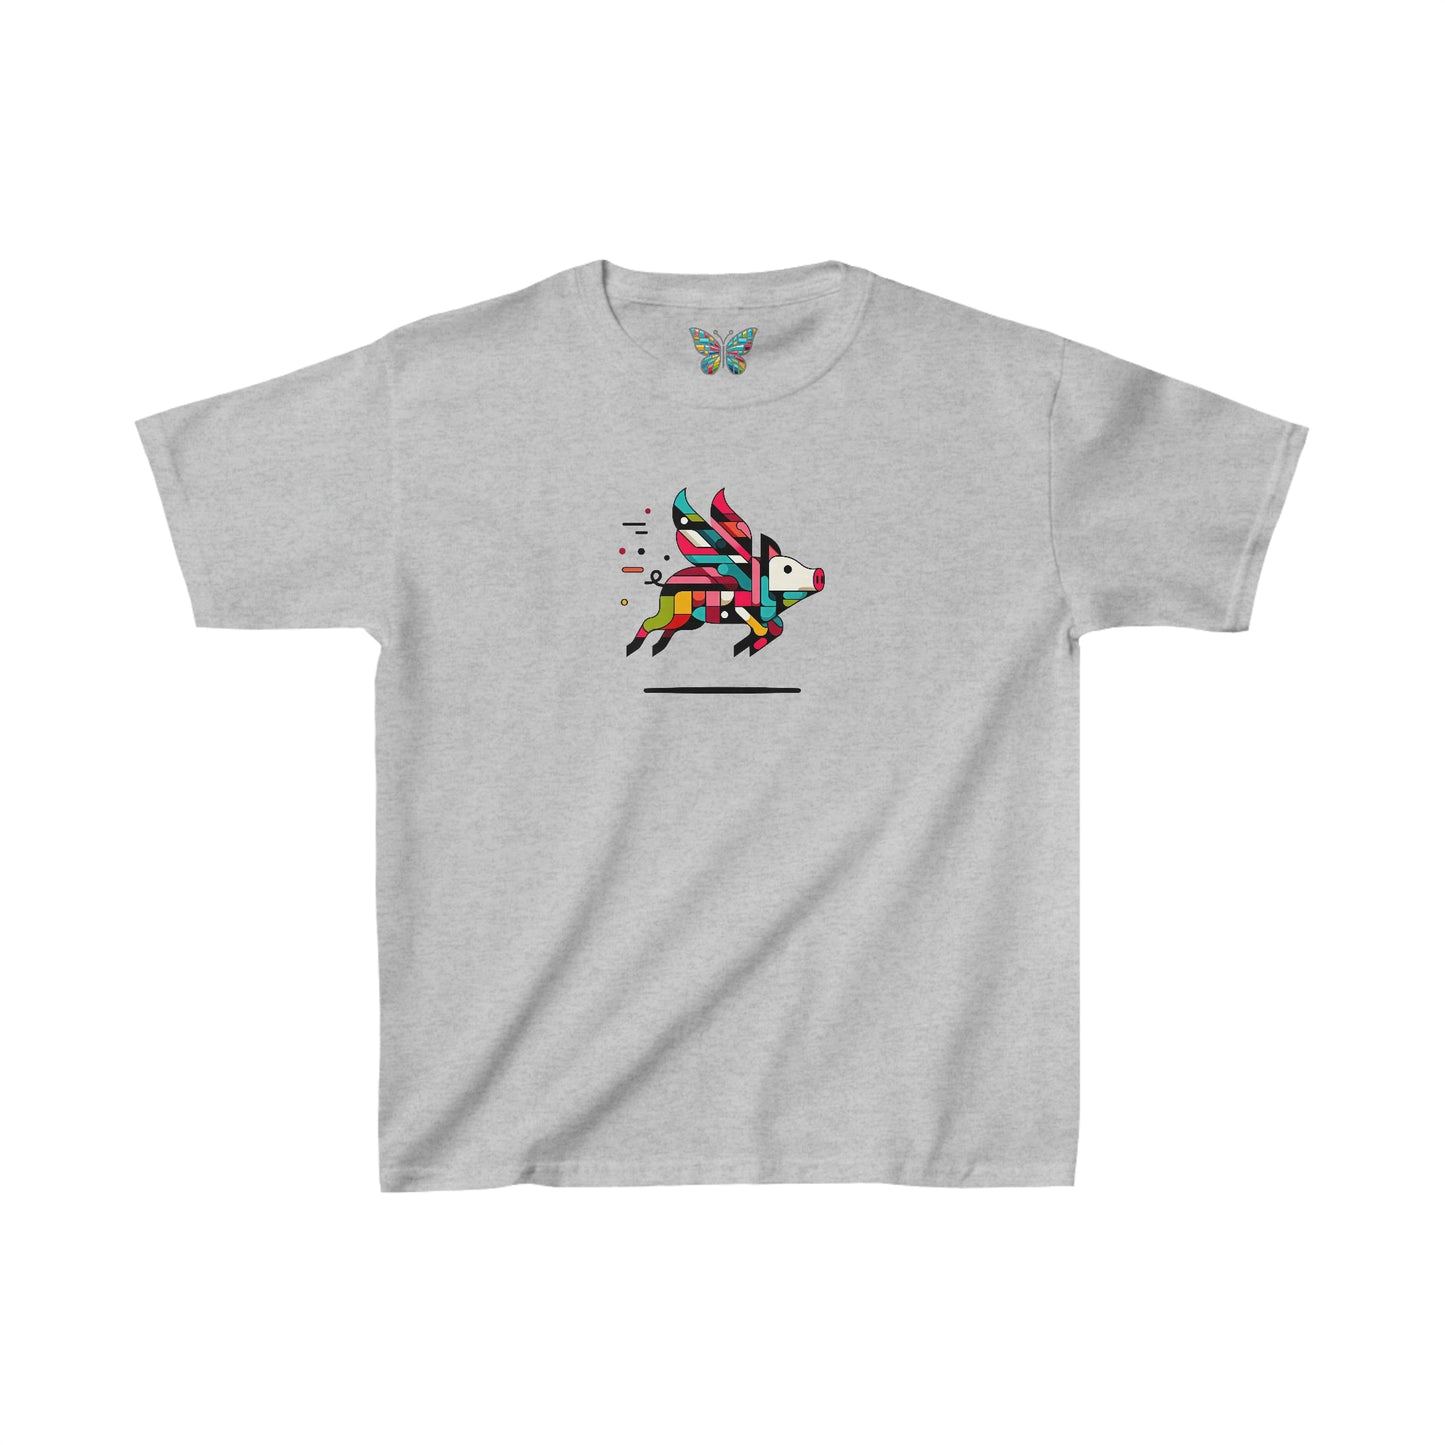 Flying Pig Quirkella - Youth - Snazzle Tee